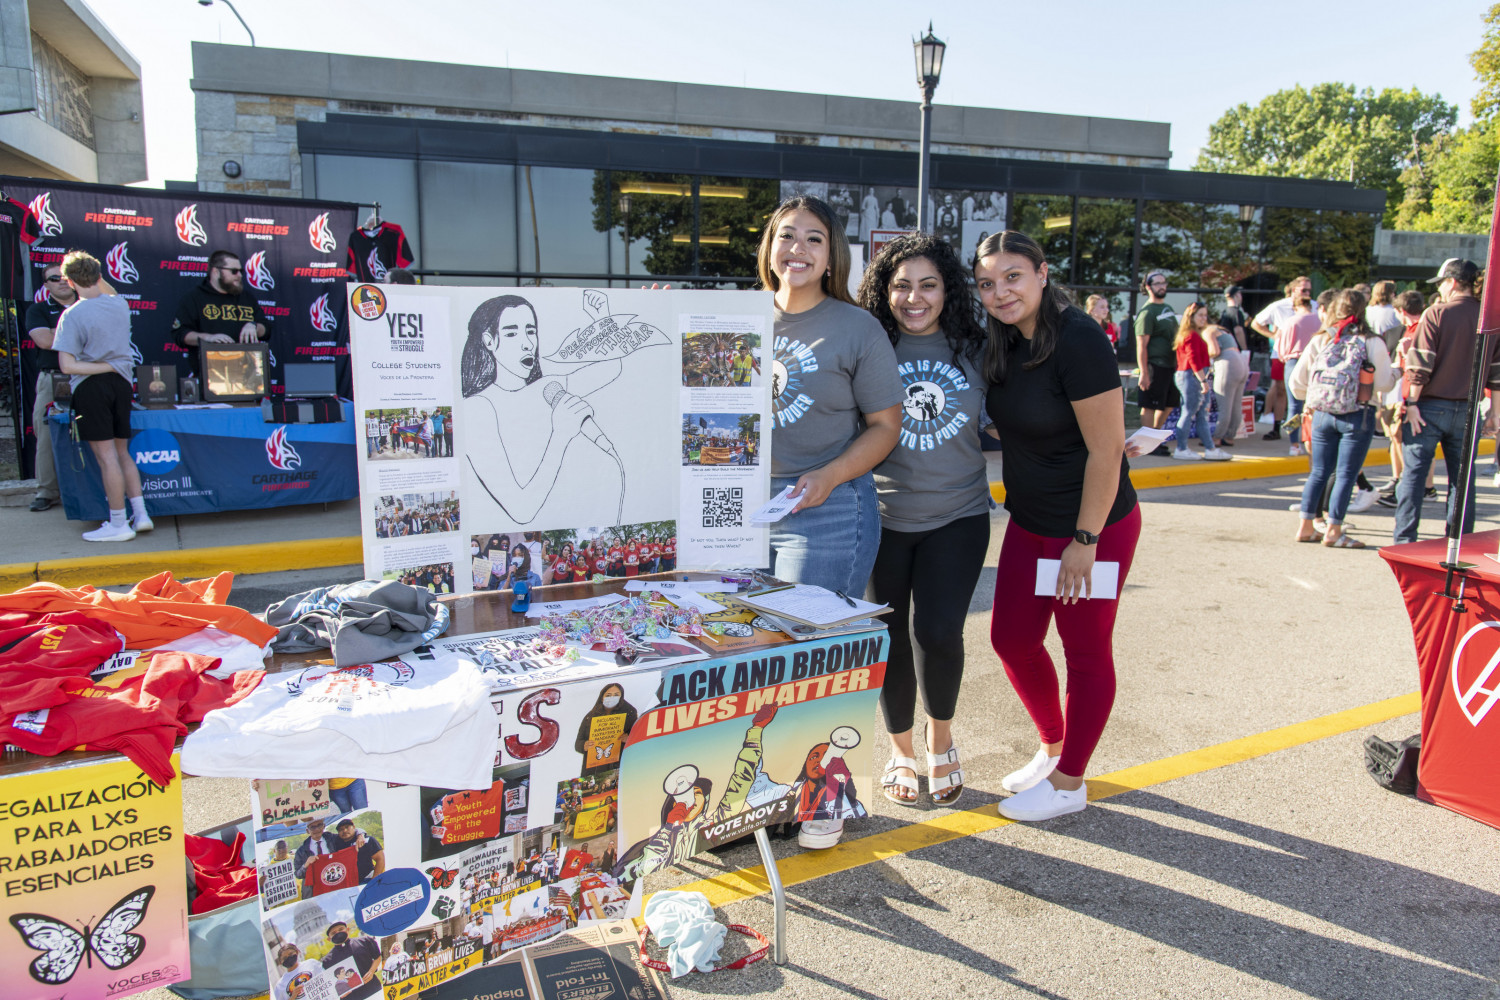 Every semester, Carthage hosts an Involvement Fair, where students can explore on-campus clubs.